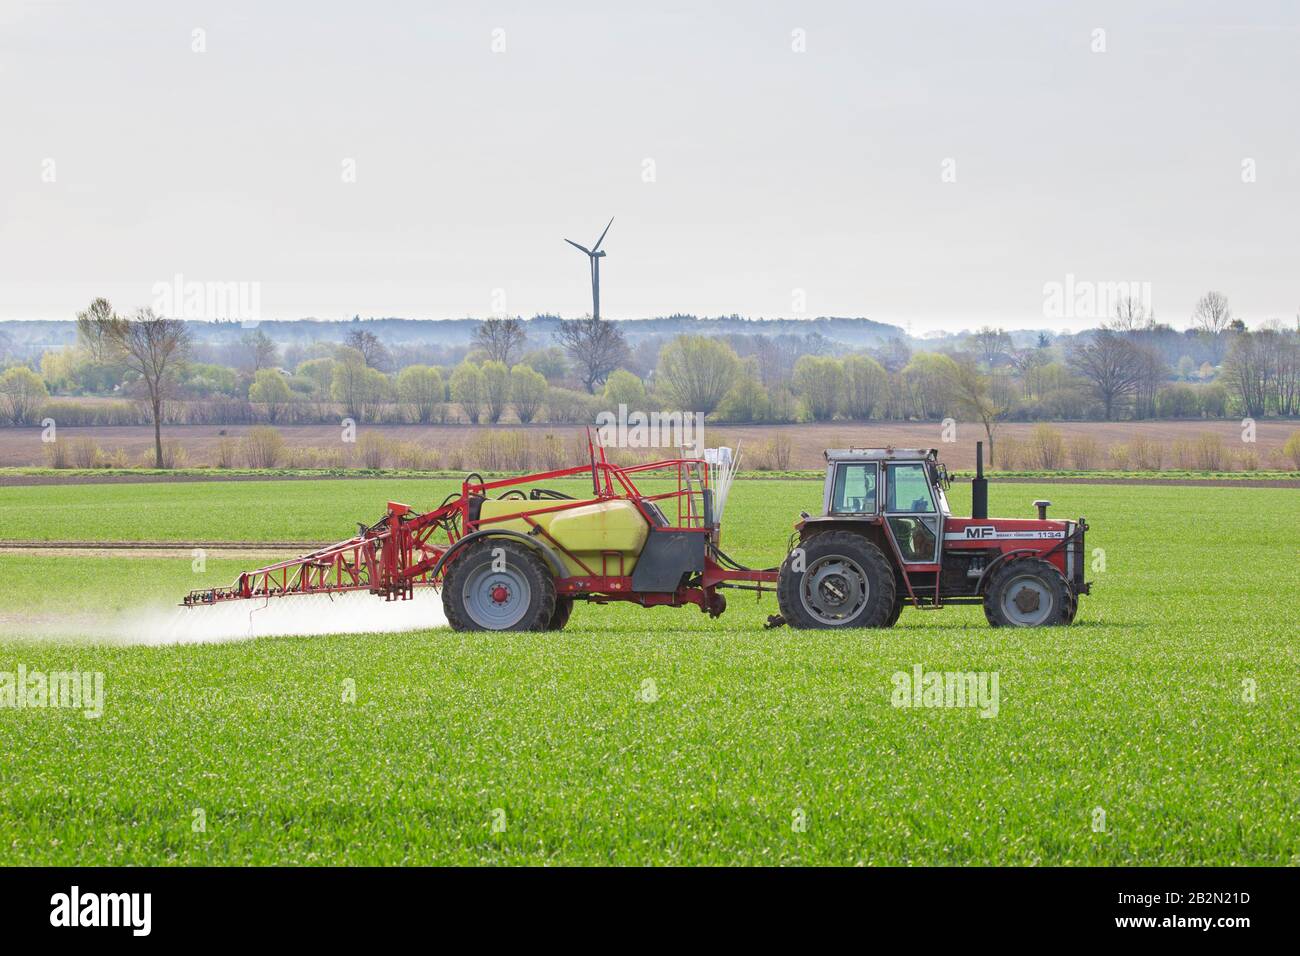 Farmer spraying pesticides / insecticides / weed killer / herbicide over field / farmland in spring Stock Photo